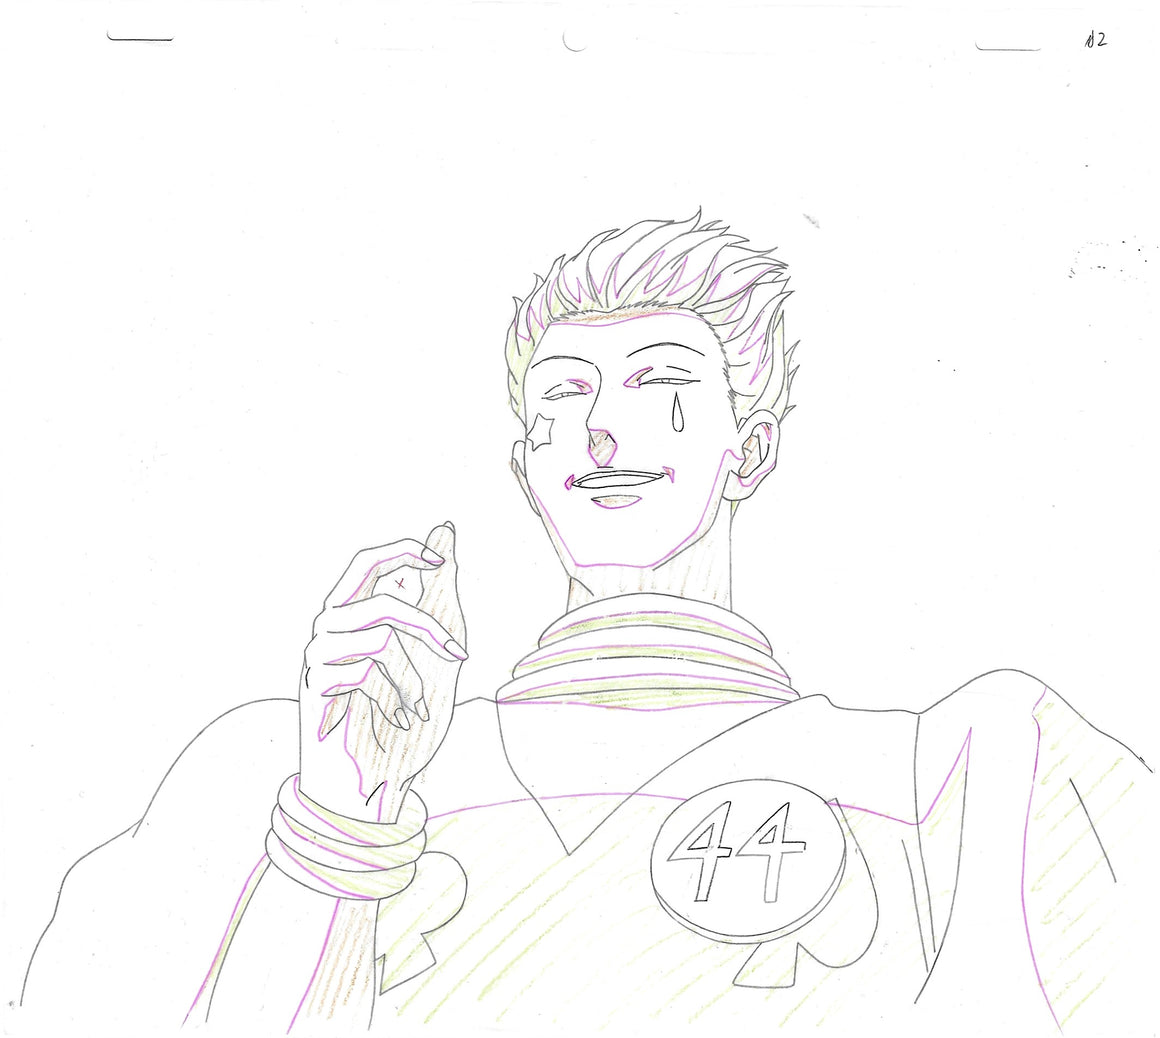 Hunter × Hunter - Hisoka with the number tag - 1-layer Production Cel w/ Douga Pencil Sketch